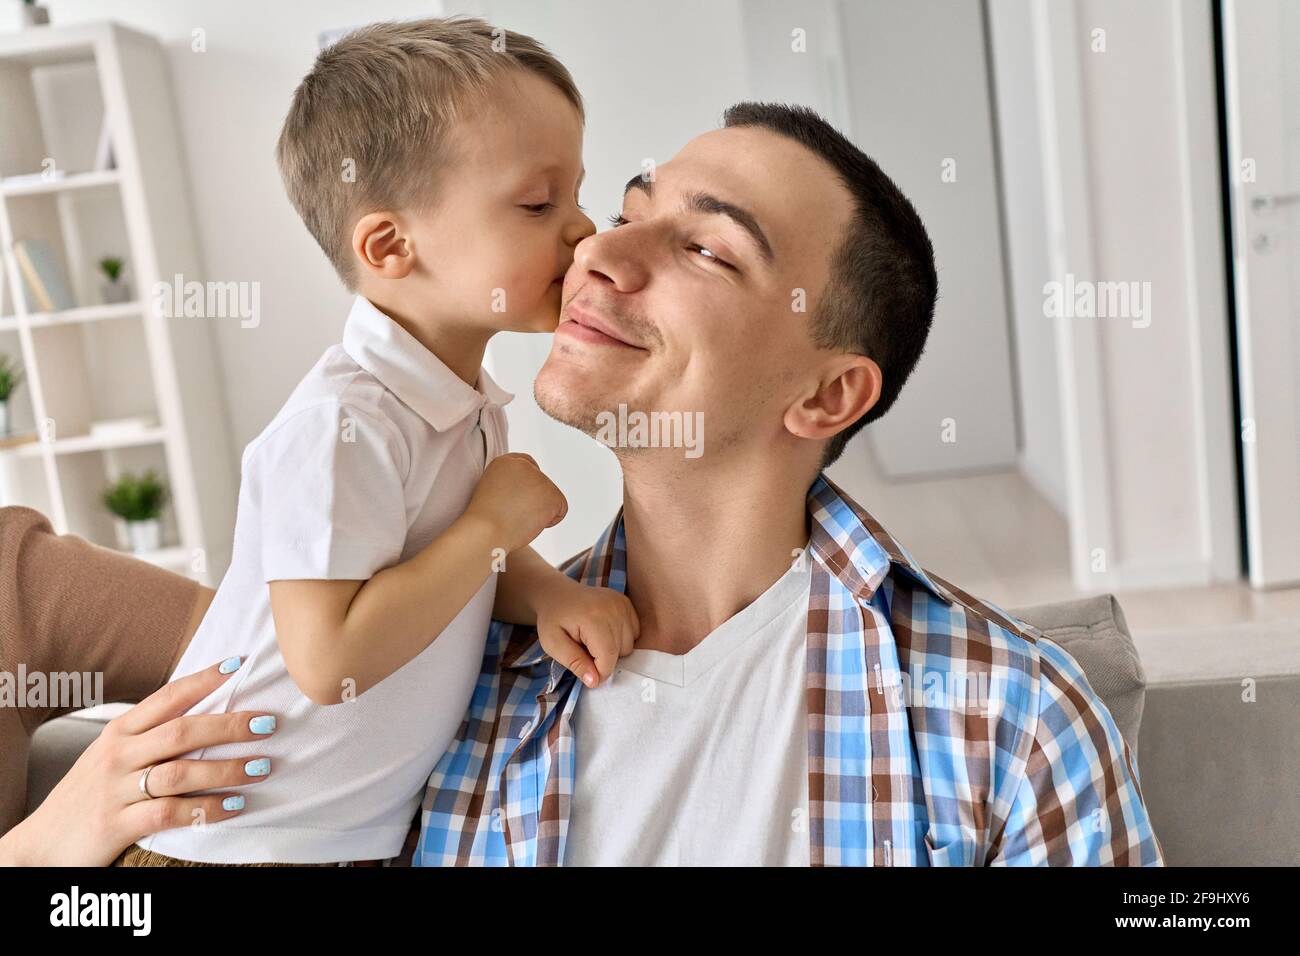 Cute toddler kid son kissing smiling dad on cheek at home. Stock Photo